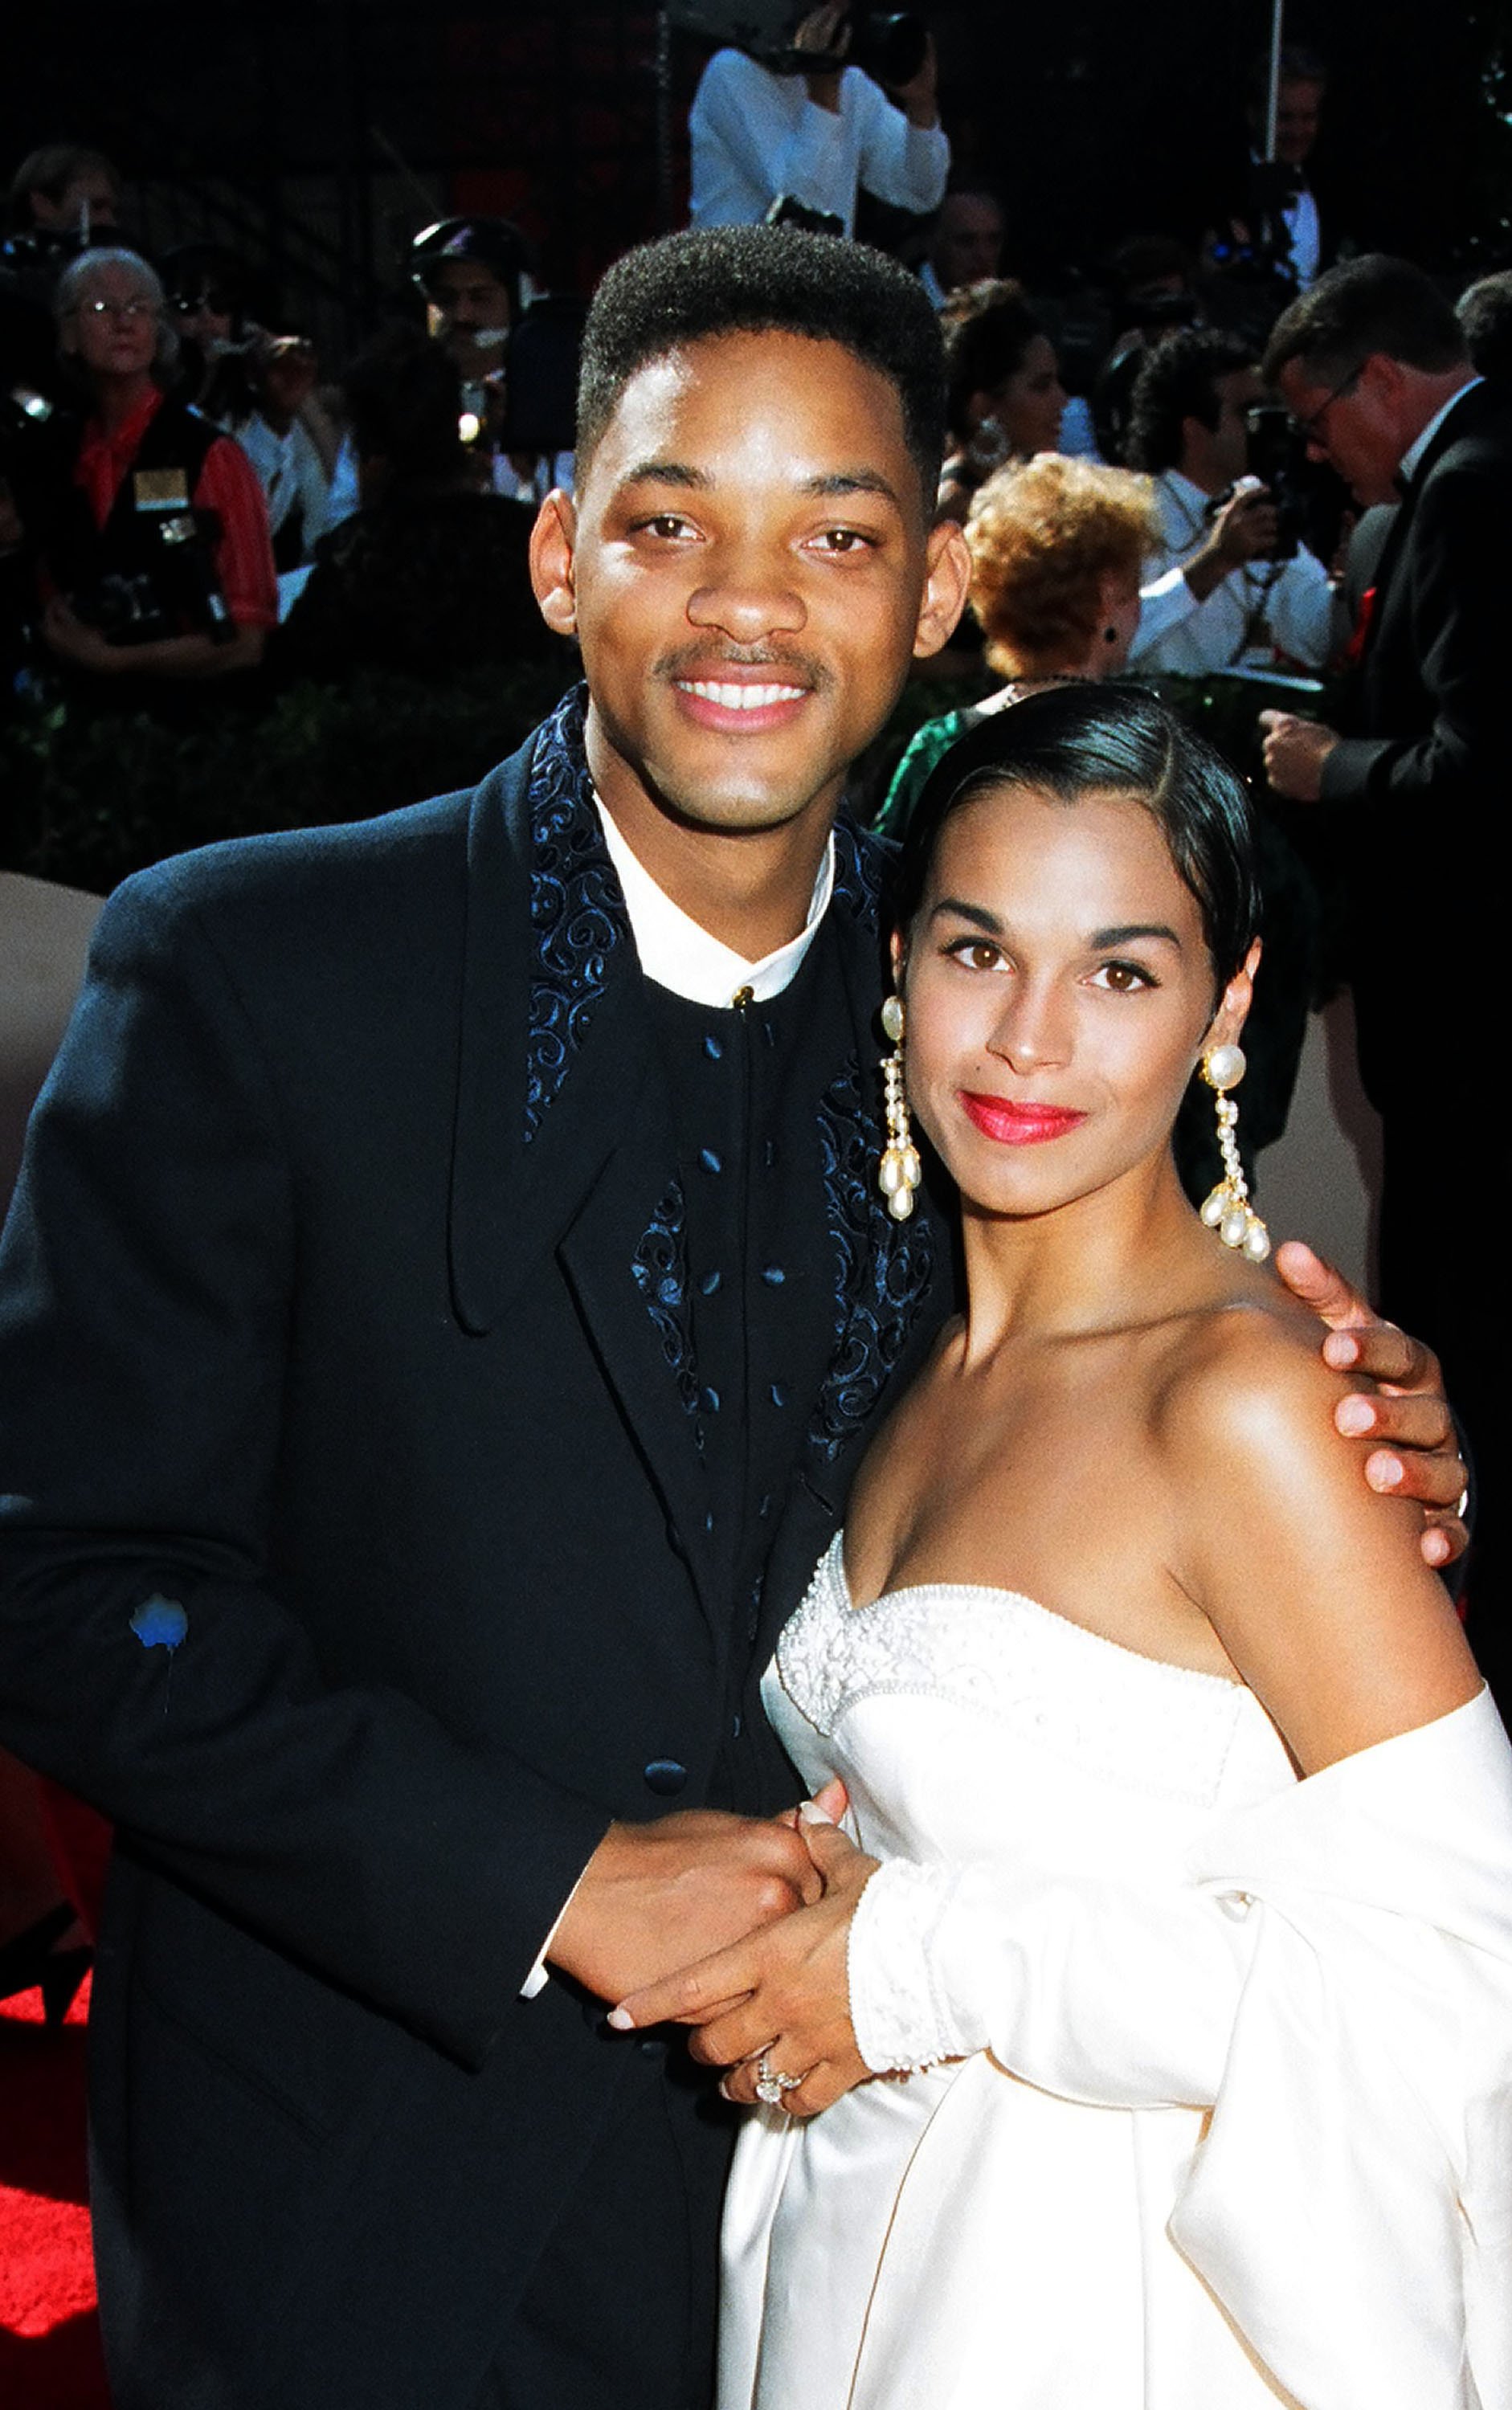 Will Smith and Sheree Zampino at the 1993 Emmy Awards Arrivals in Los Angeles, California. | Source: Getty Images